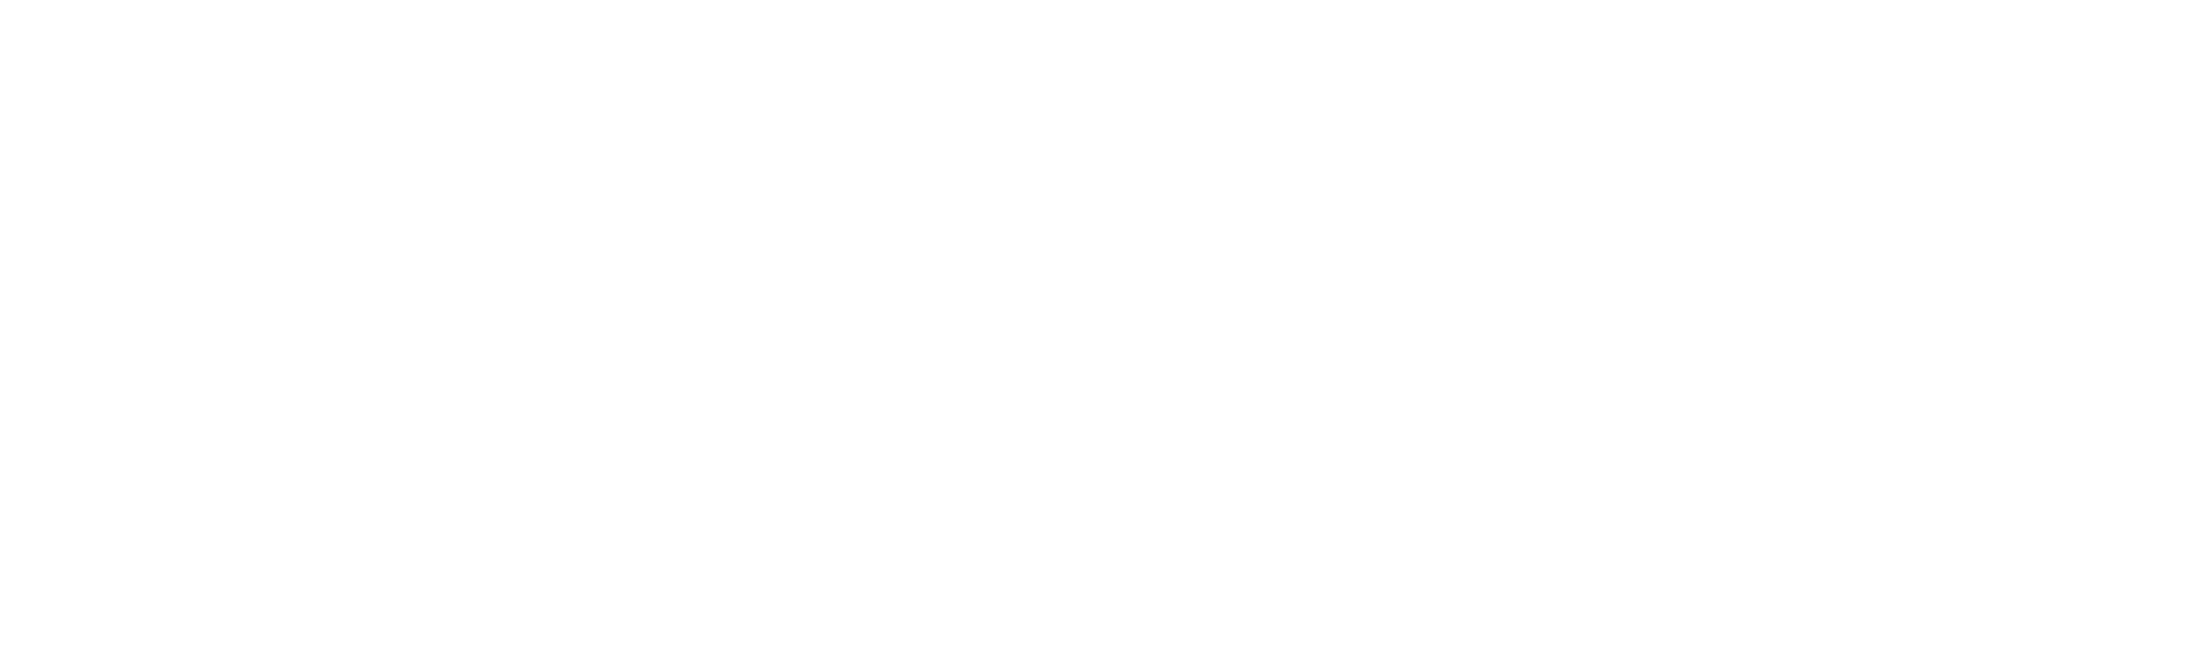 Anker Distribution Systems Logo Black And White - Samsung Logo White Png (2400x2400), Png Download